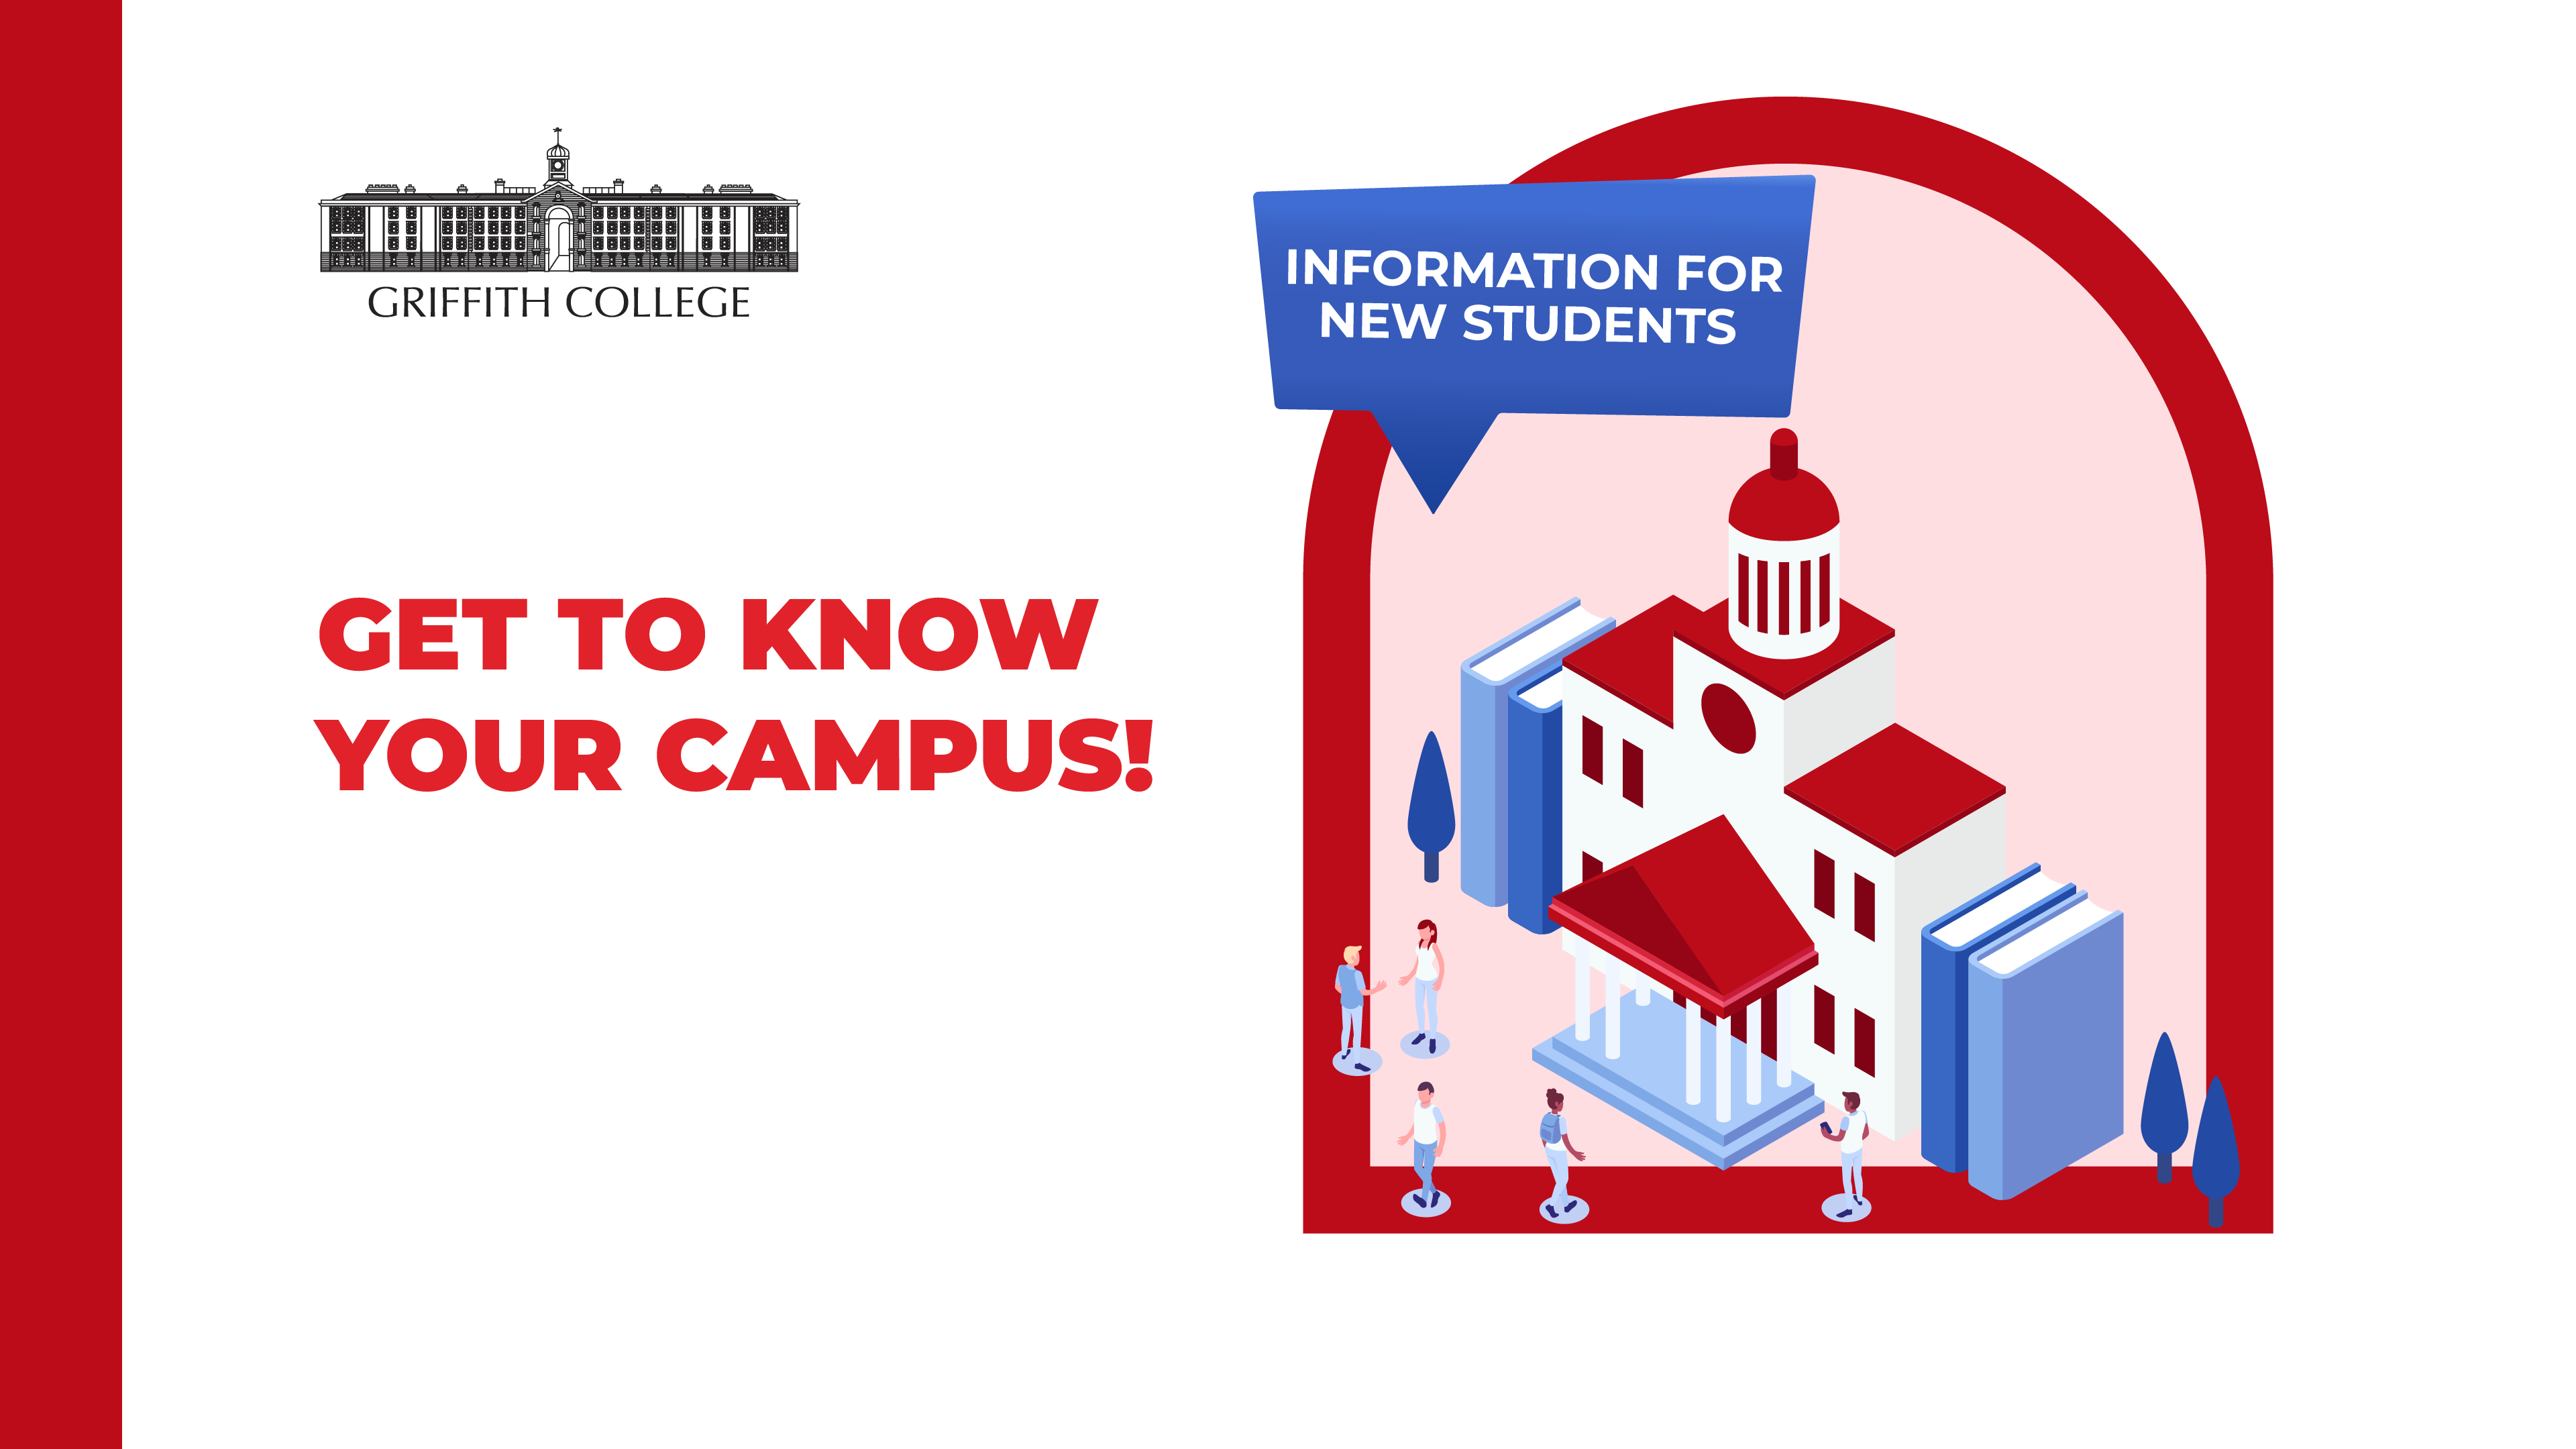 Get to know your campus